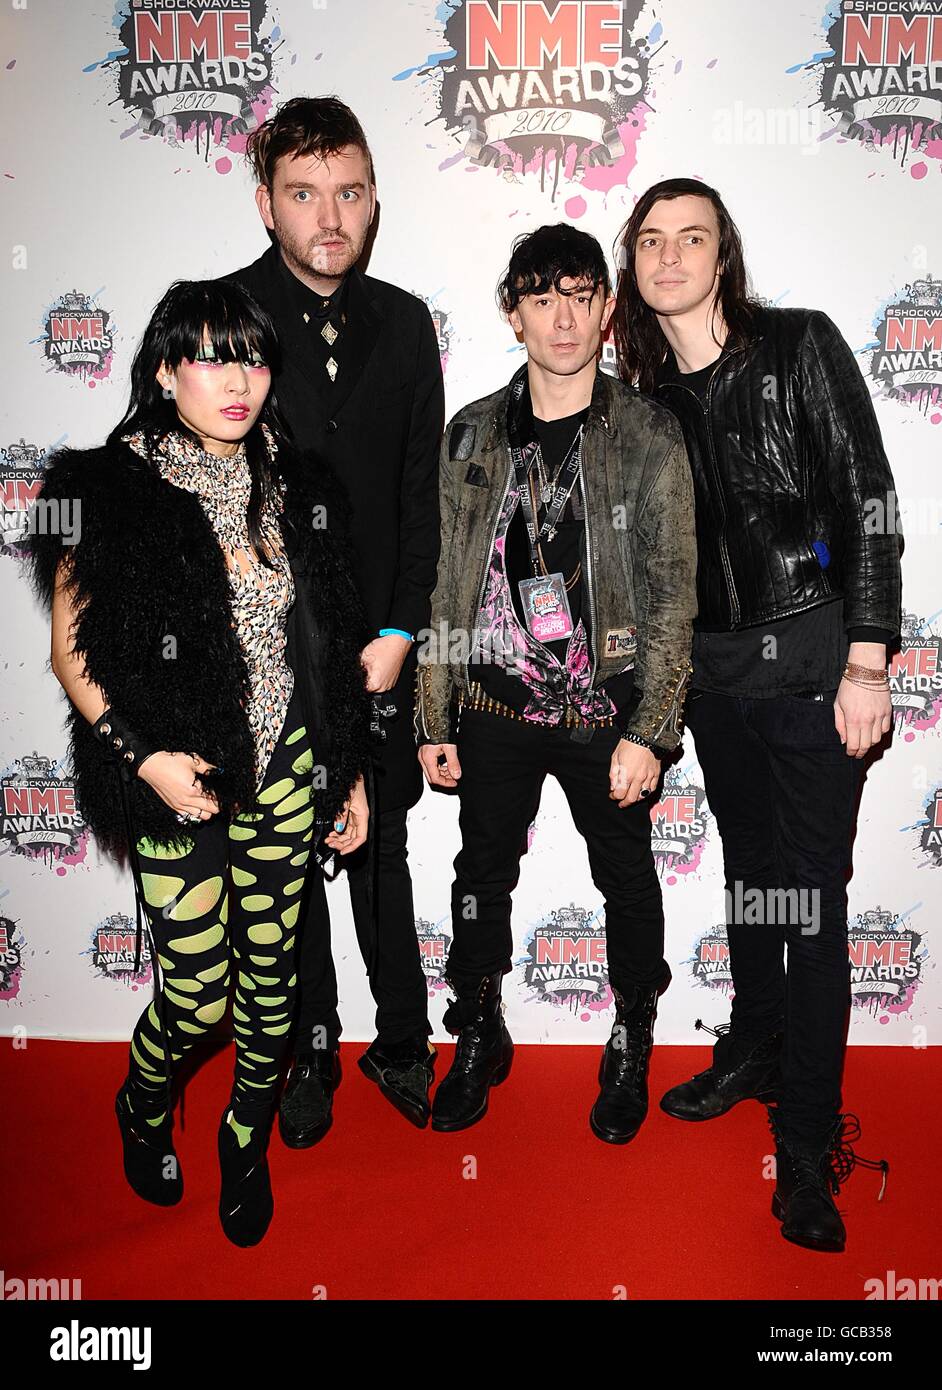 Akiko Matsuura, Milo Cordell, Robbie Furze and Leopold Ross of The Big Pink (left to right) arriving for the 2010 Shockwaves NME Awards at the O2 Academy, Brixton, London Stock Photo